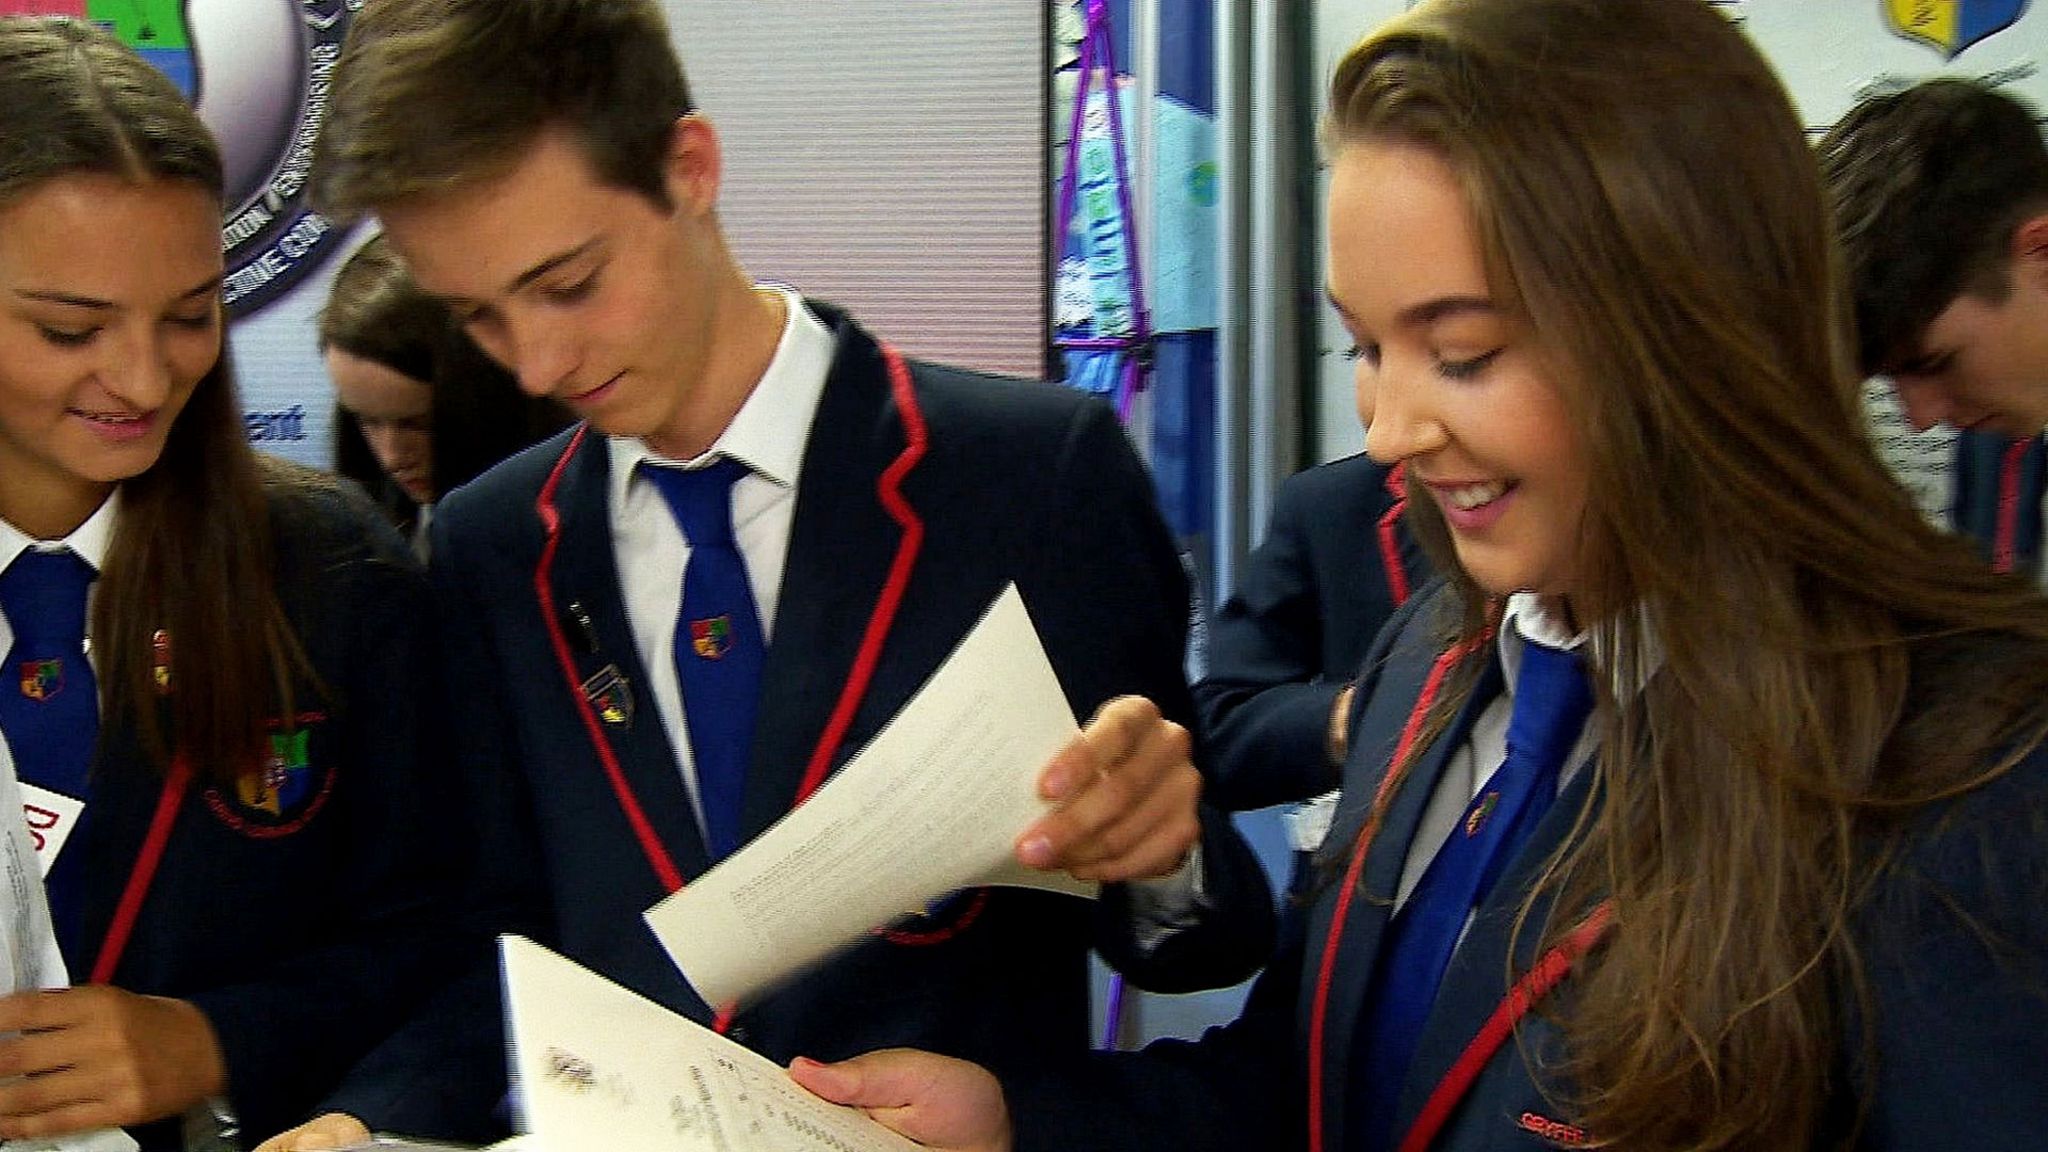 Pupils at Gryffe High School getting their results